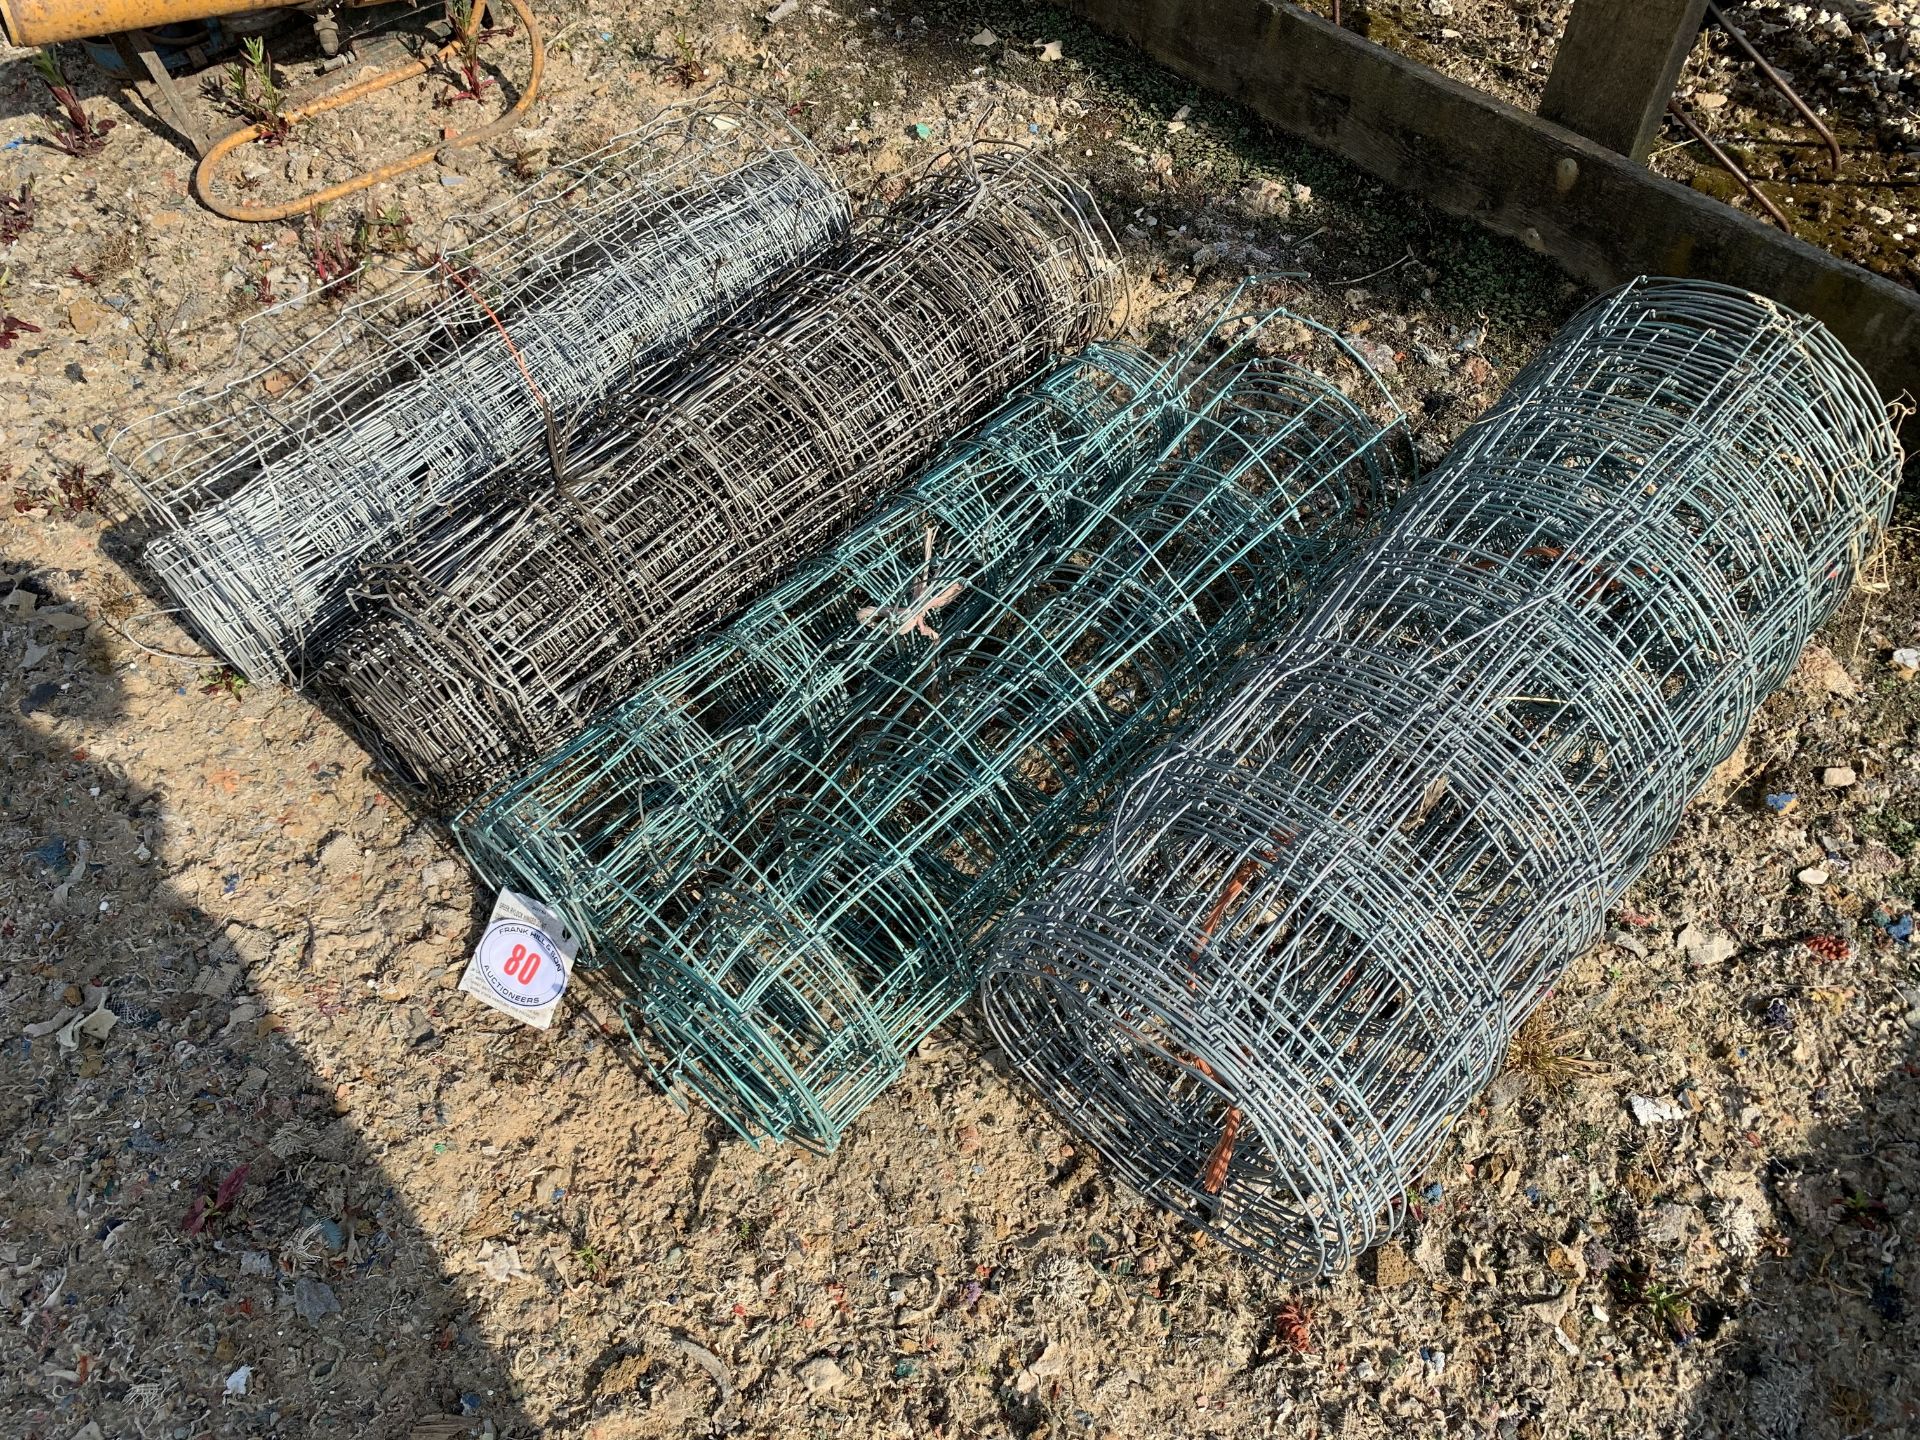 Assorted pig netting